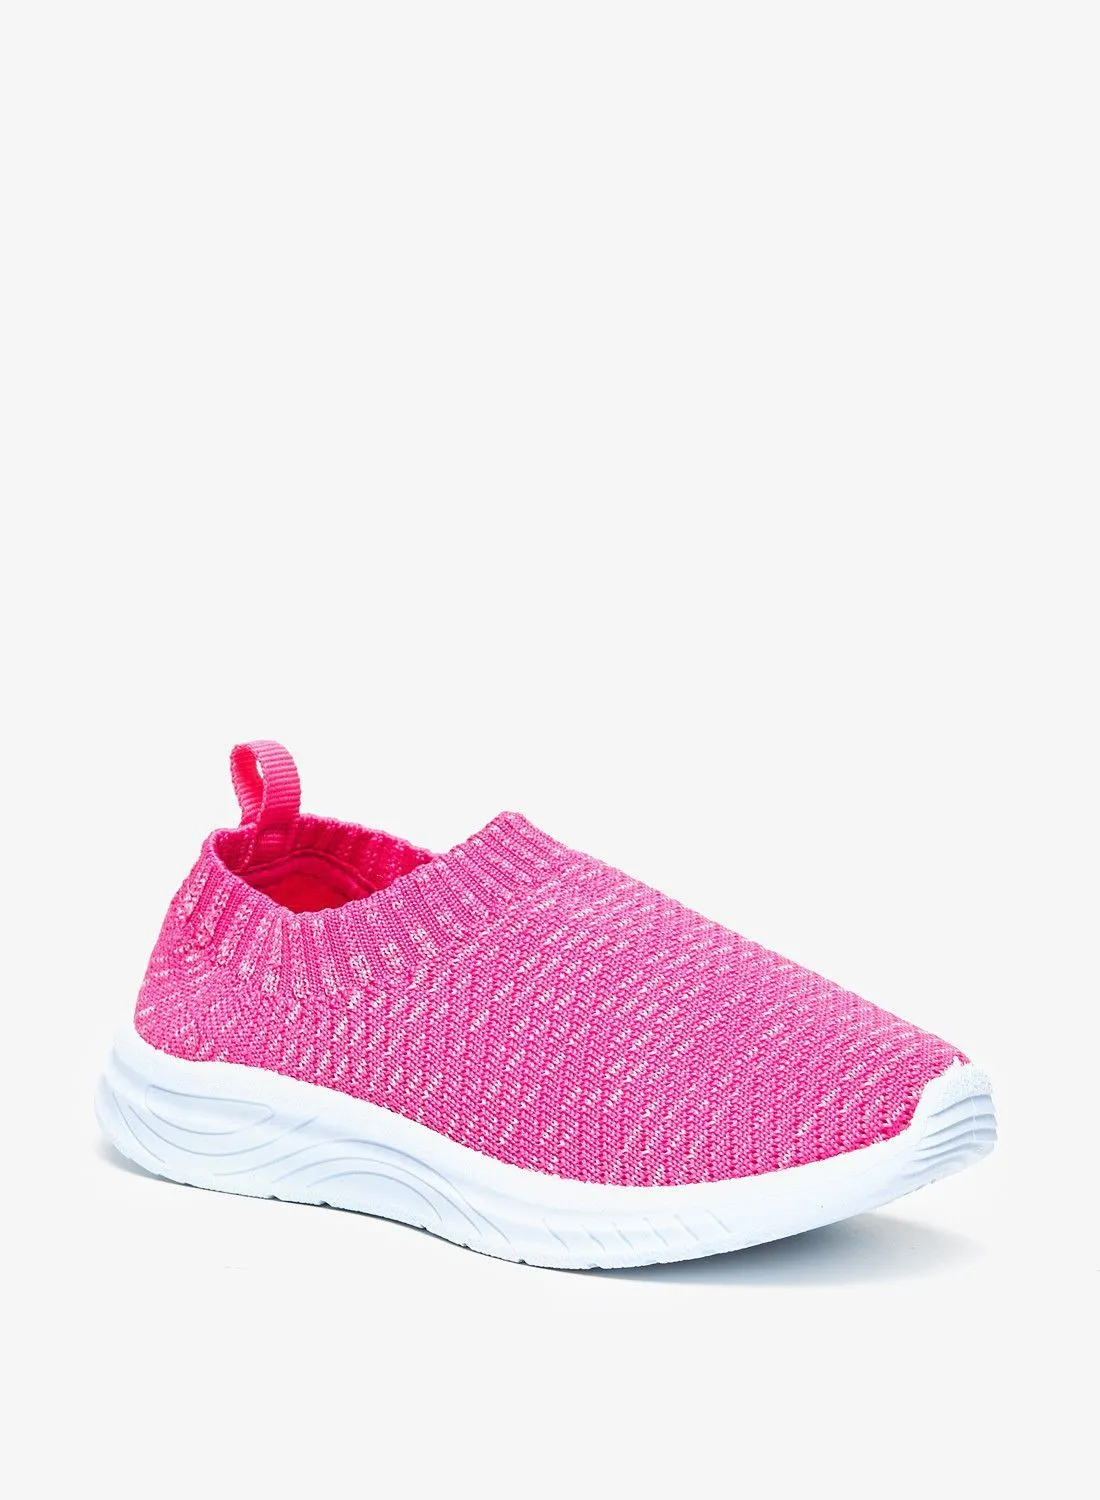 shoexpress Textured Slip On Trainers with Pull Tabs Pink